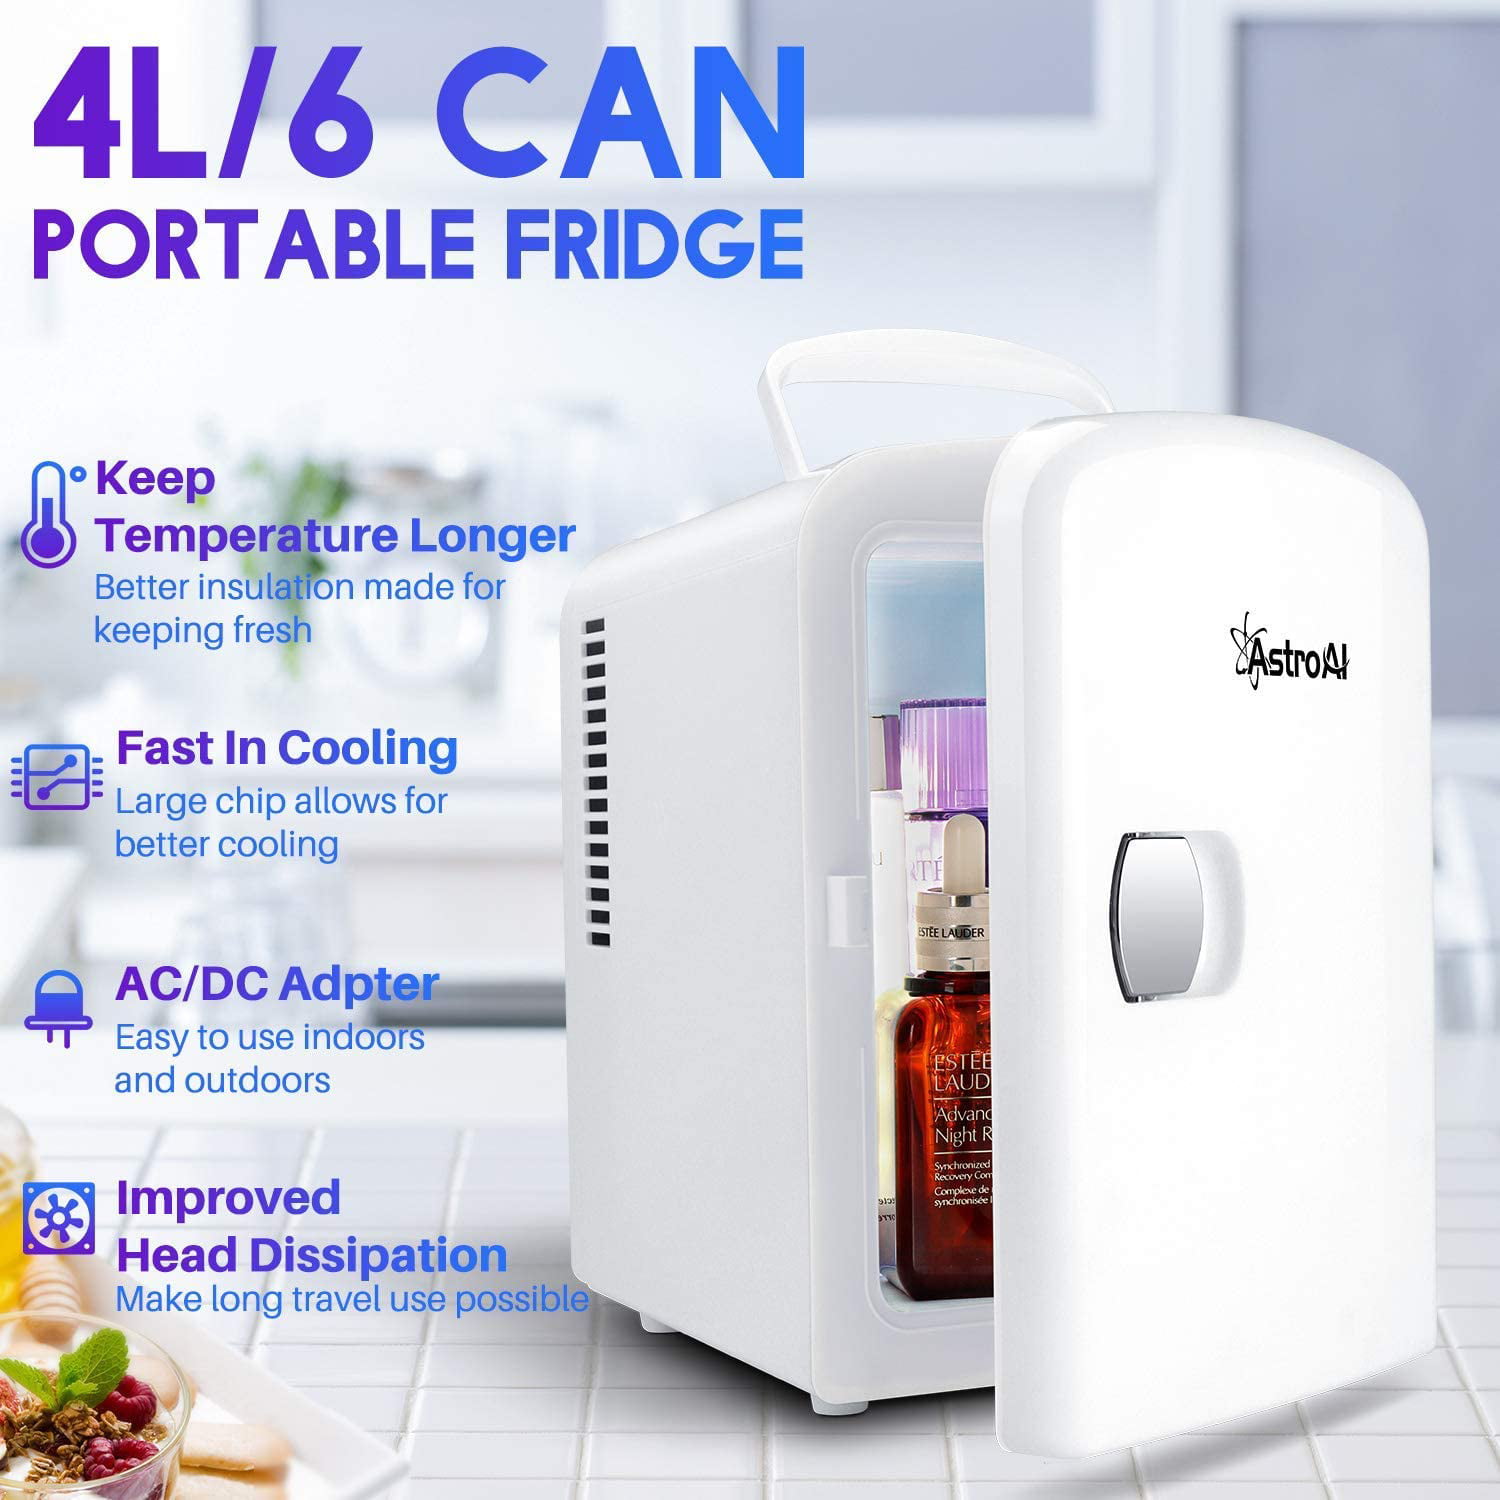 Medications Breast Milk Teal Foods AstroAI Mini Fridge 4 Liter/6 Can AC/DC Portable Thermoelectric Cooler and Warmer for Skincare Bedroom and Travel 